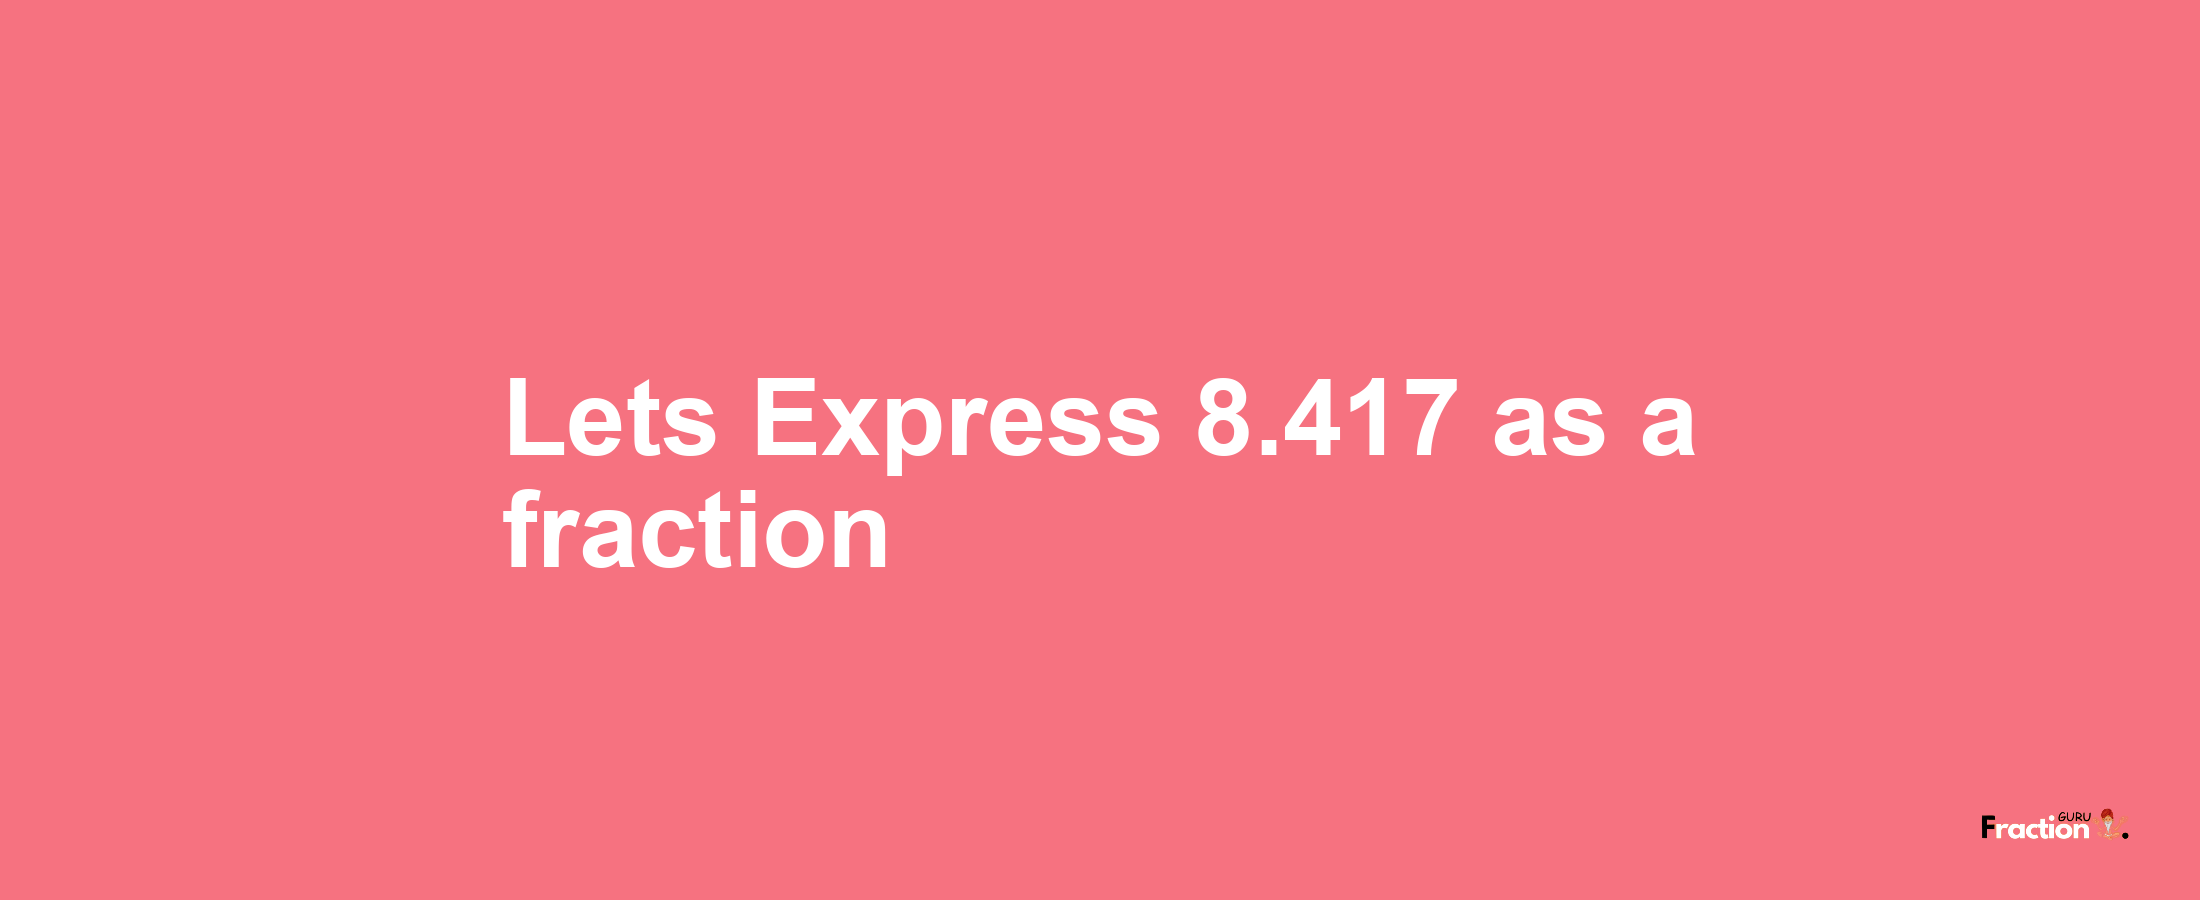 Lets Express 8.417 as afraction